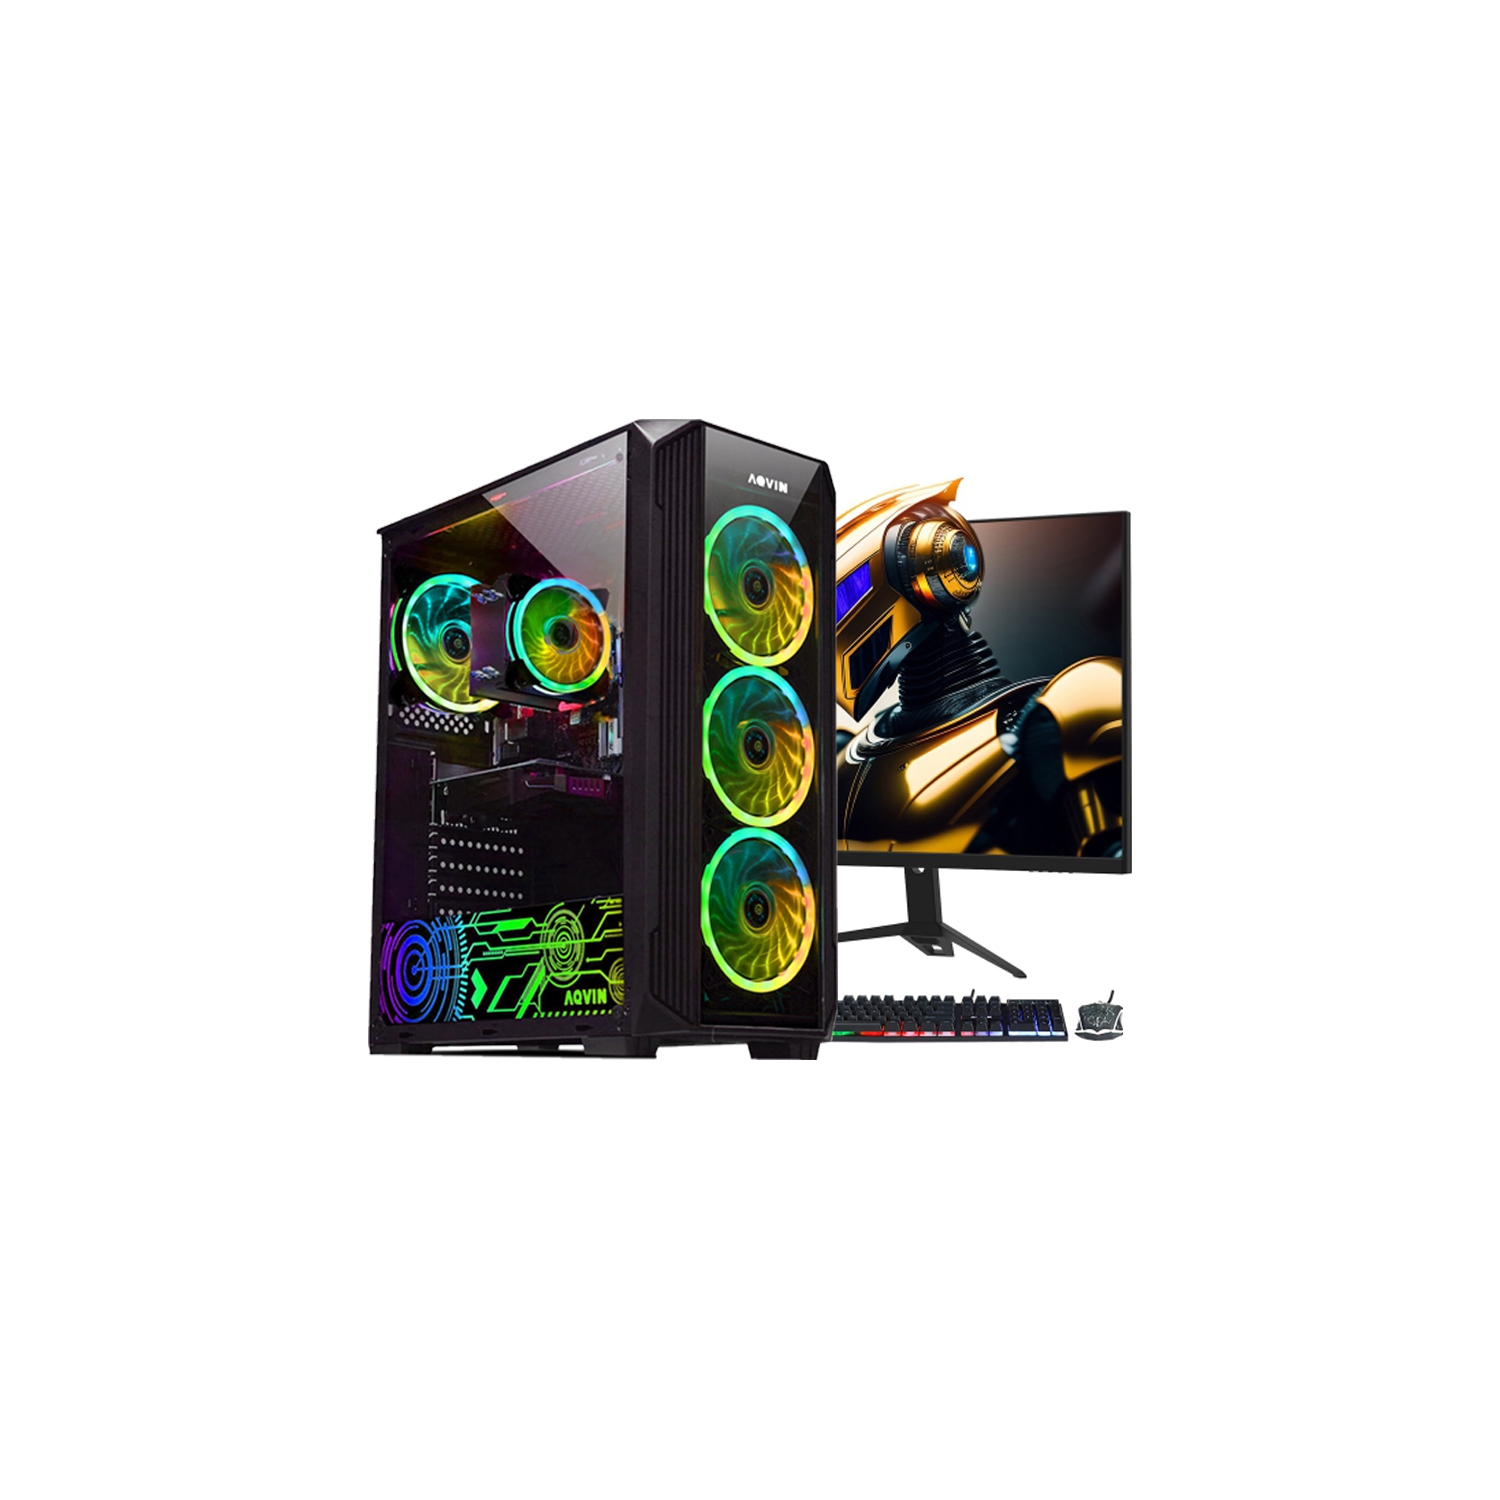 AQVIN ZForce Gaming Desktop Computer PC with 27-inch Curved Gaming Monitor| Intel Hexa-Core i7 up to 4.60 GHz| GeForce RTX 3080 10GB GDDR6| 32GB DDR4 RAM| 1TB SSD| Windows 11 Pro